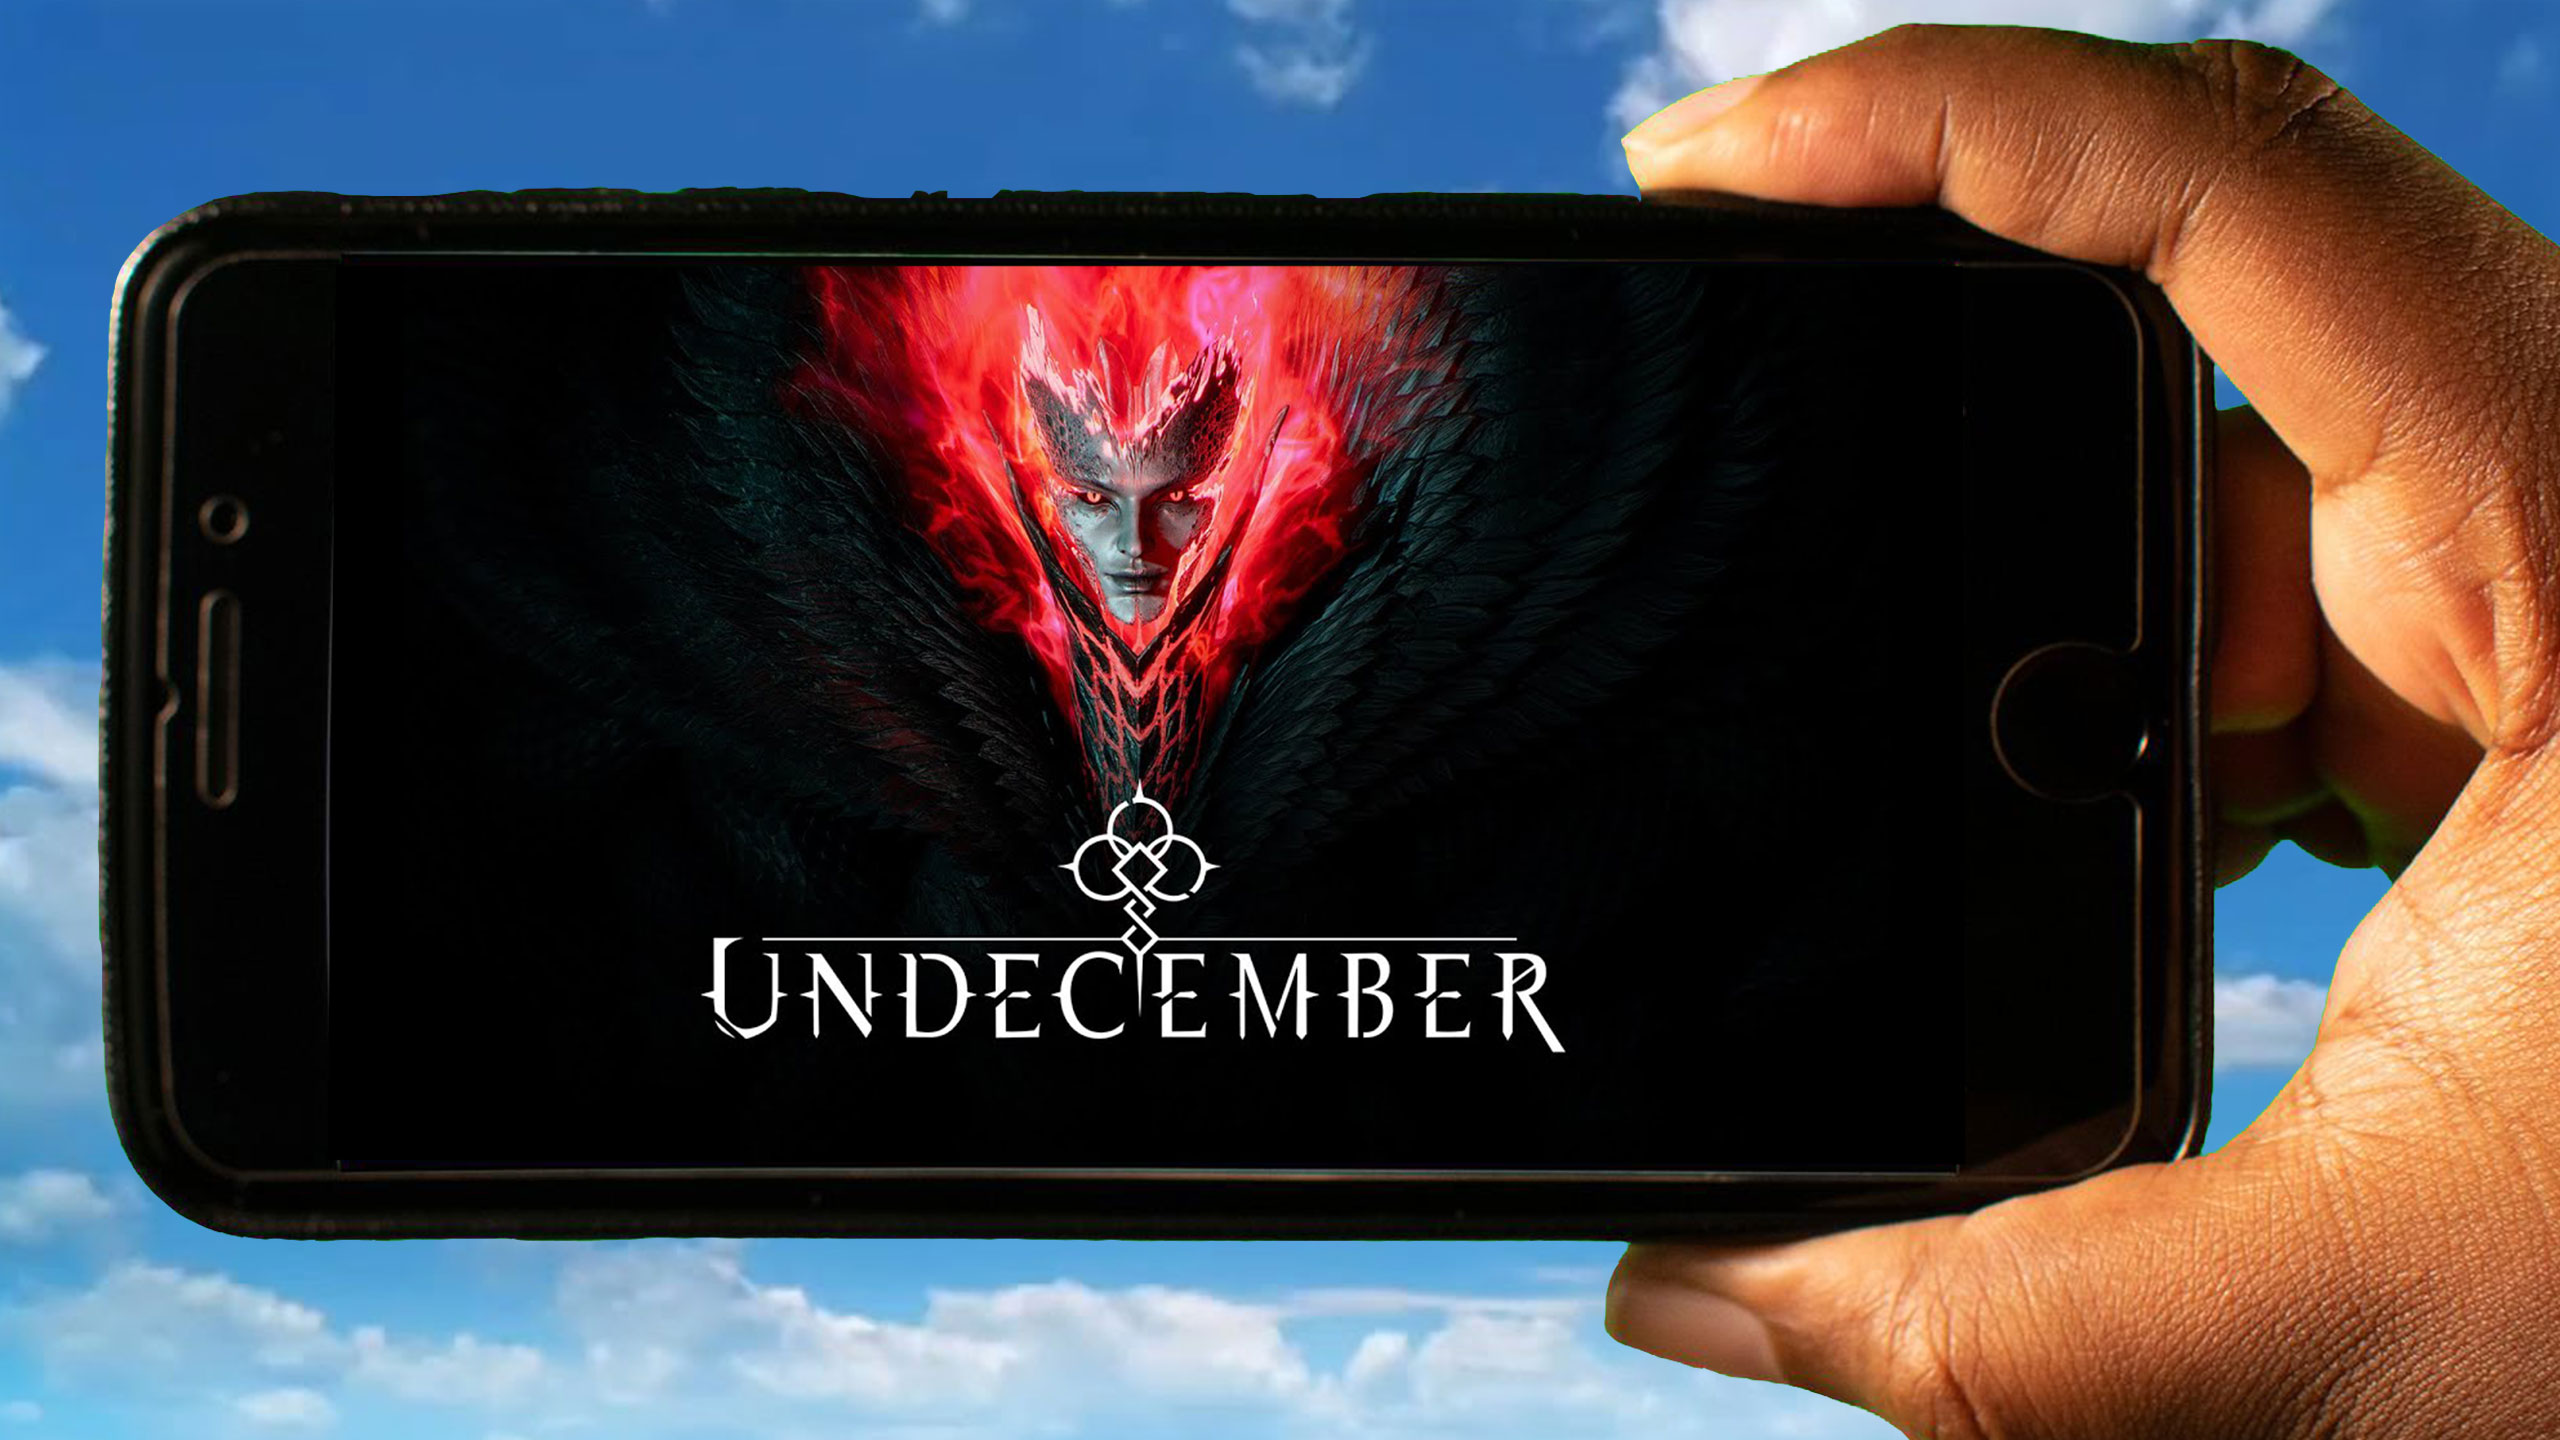 undecember #gamereview #androidgames #mobilegame #xboxcontroller